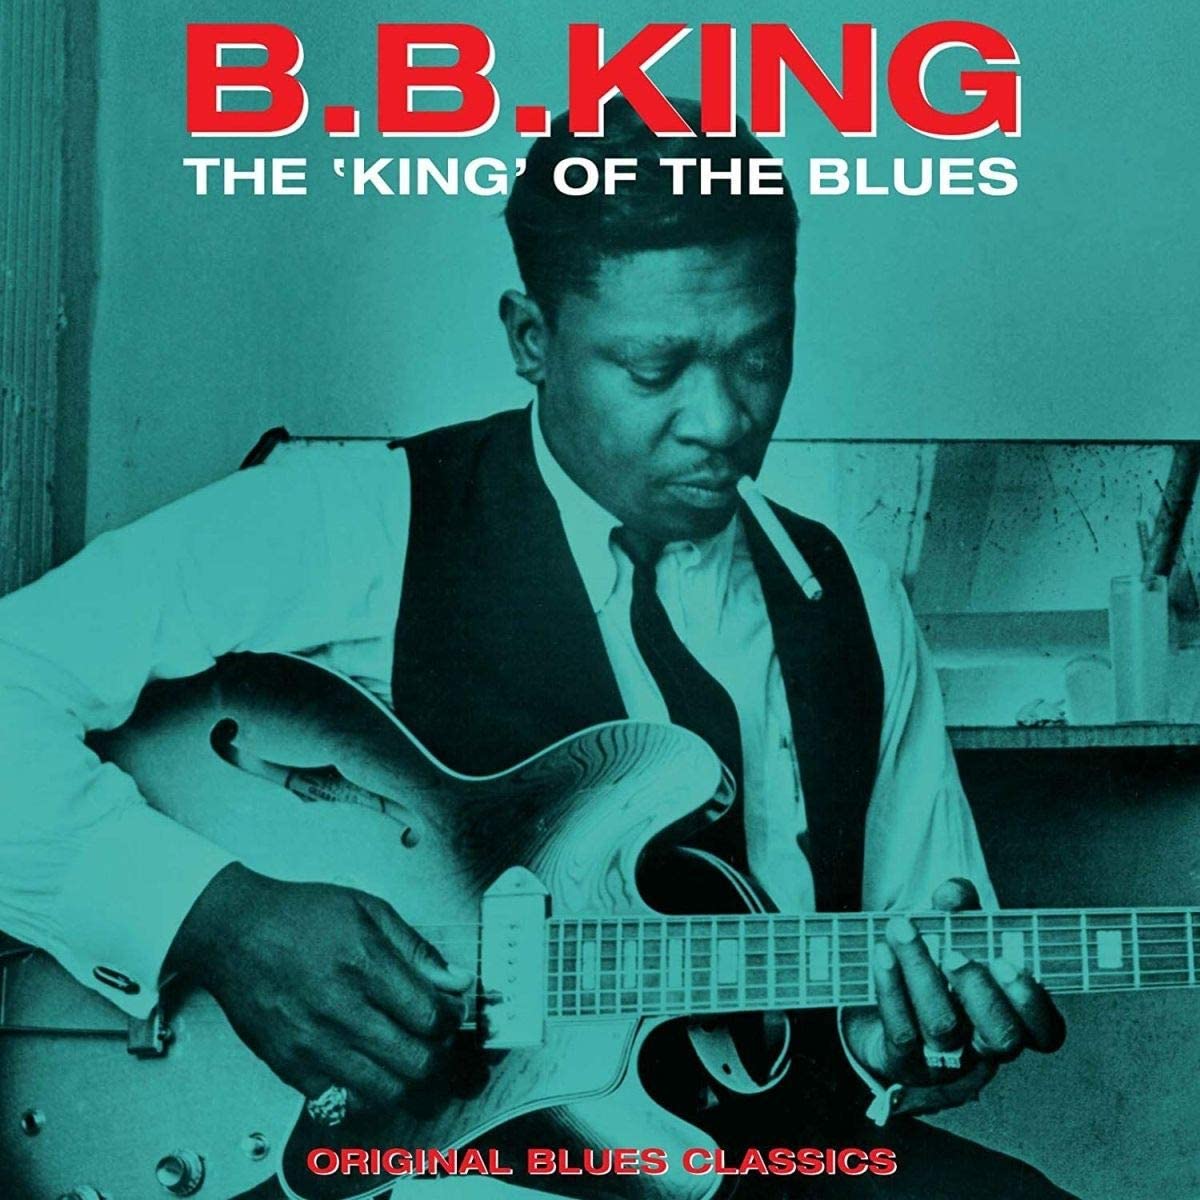 B.B. King - "The Thrill is Gone (Live at Montreux 1993)" - Song of the ...